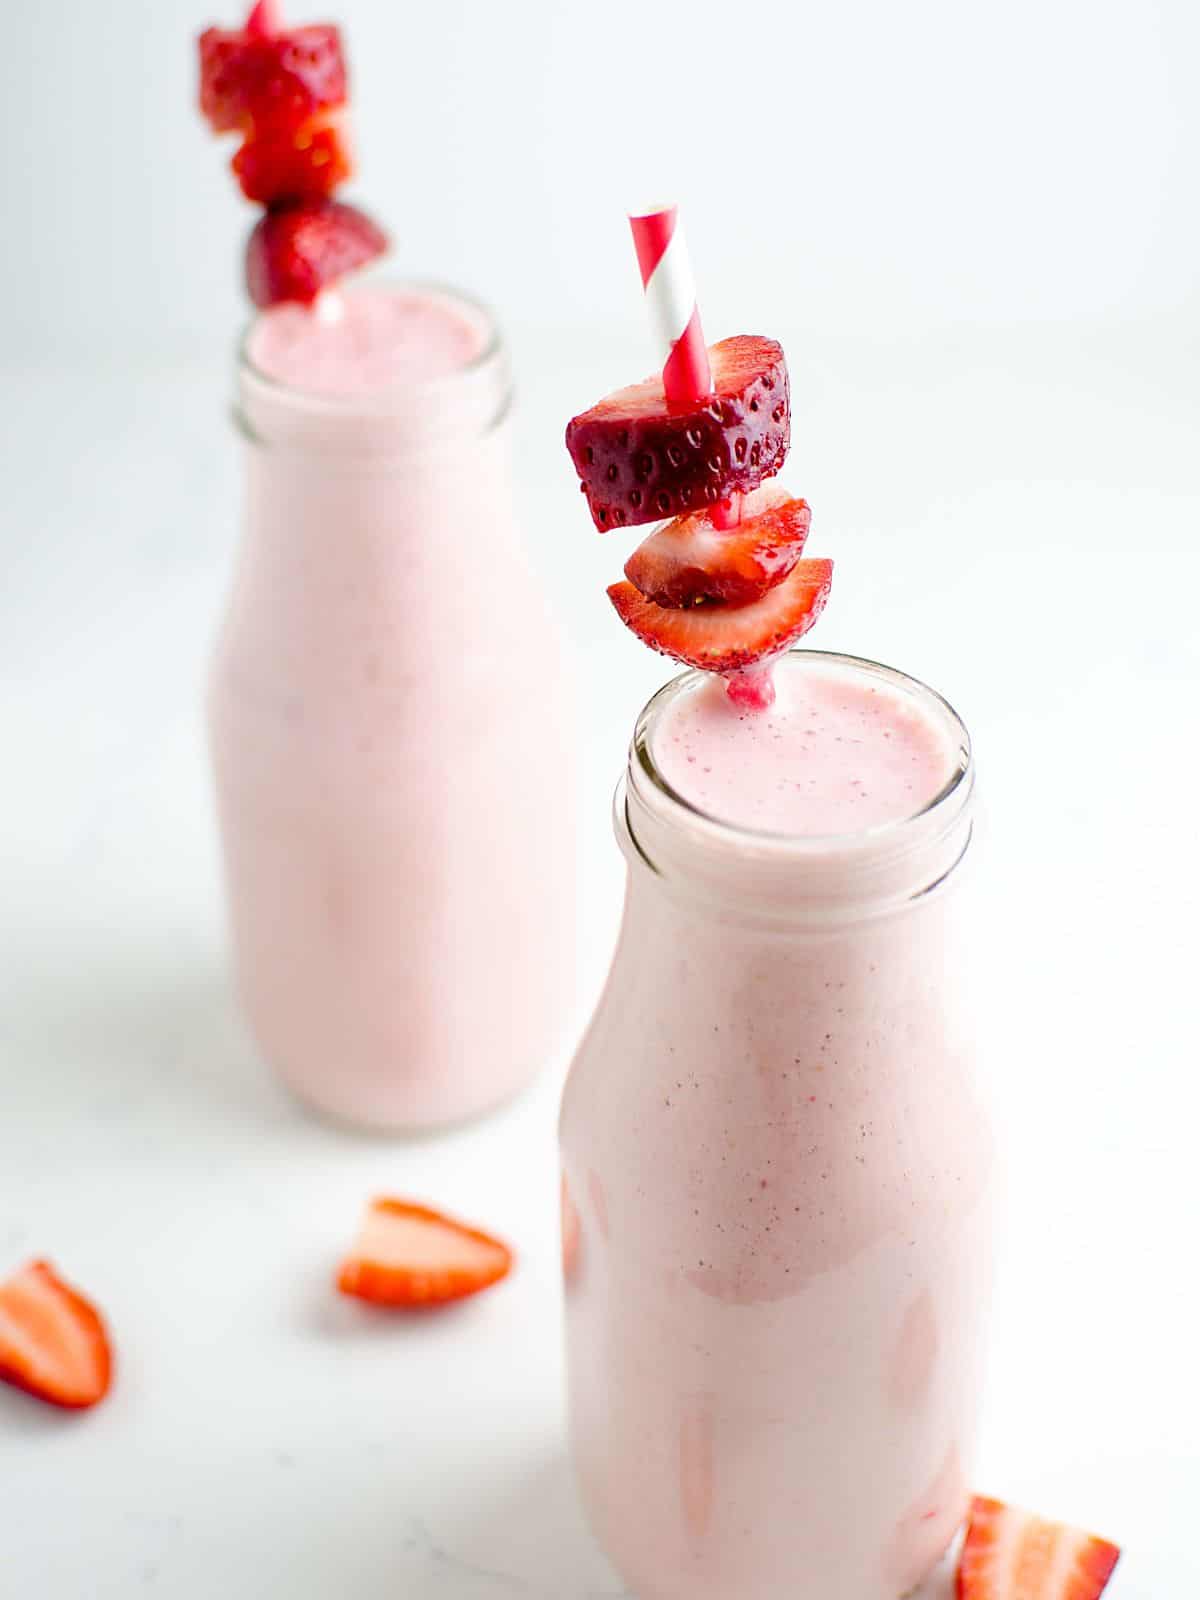 Strawberry cheesecake protein smoothie in a milk bottle glass garnished with sliced strawberries on a straw.